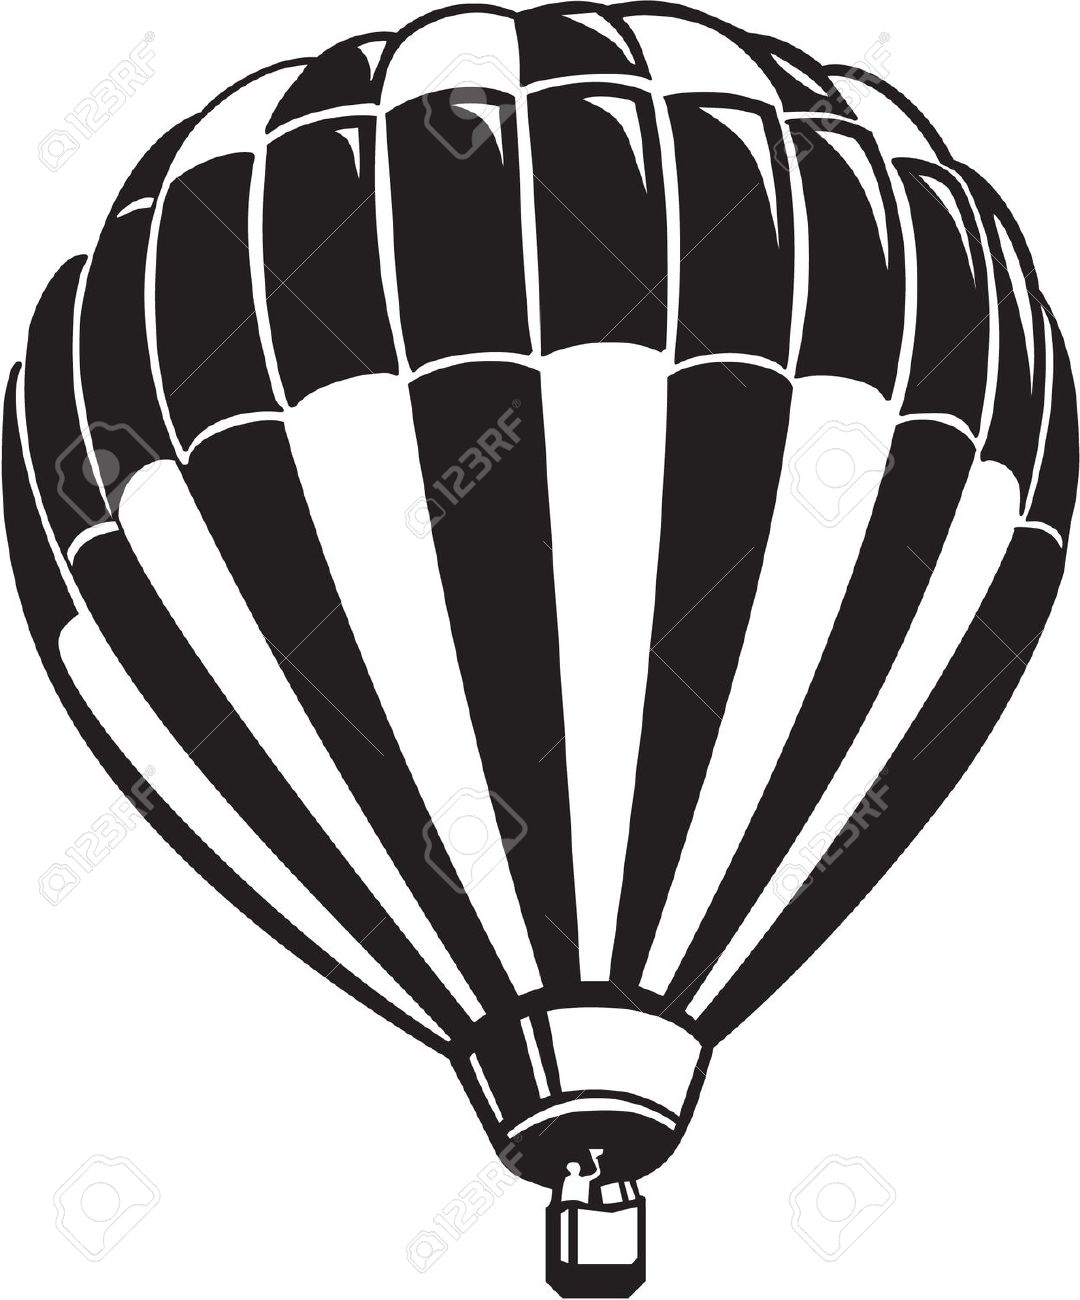 Black And White Hot Air Balloon | Free download on ClipArtMag